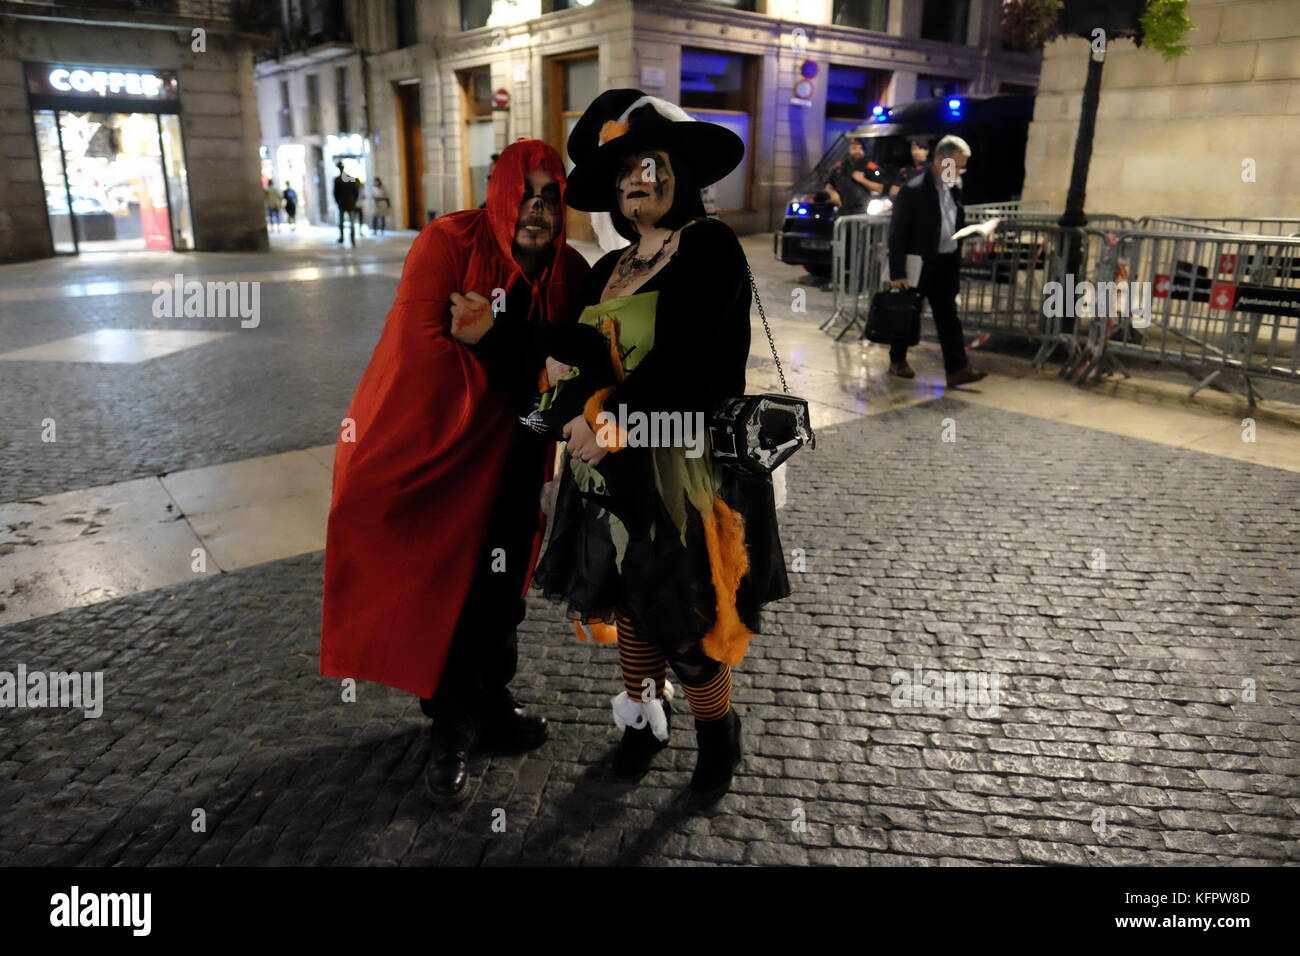 Barcelona, Spain. 31st Oct, 2017. People wearing Halloween costumes, stand in front of Catalan police (Mossos) in Plaça de Sant Jaume. Joe O'Brien/Alamy Live News Stock Photo